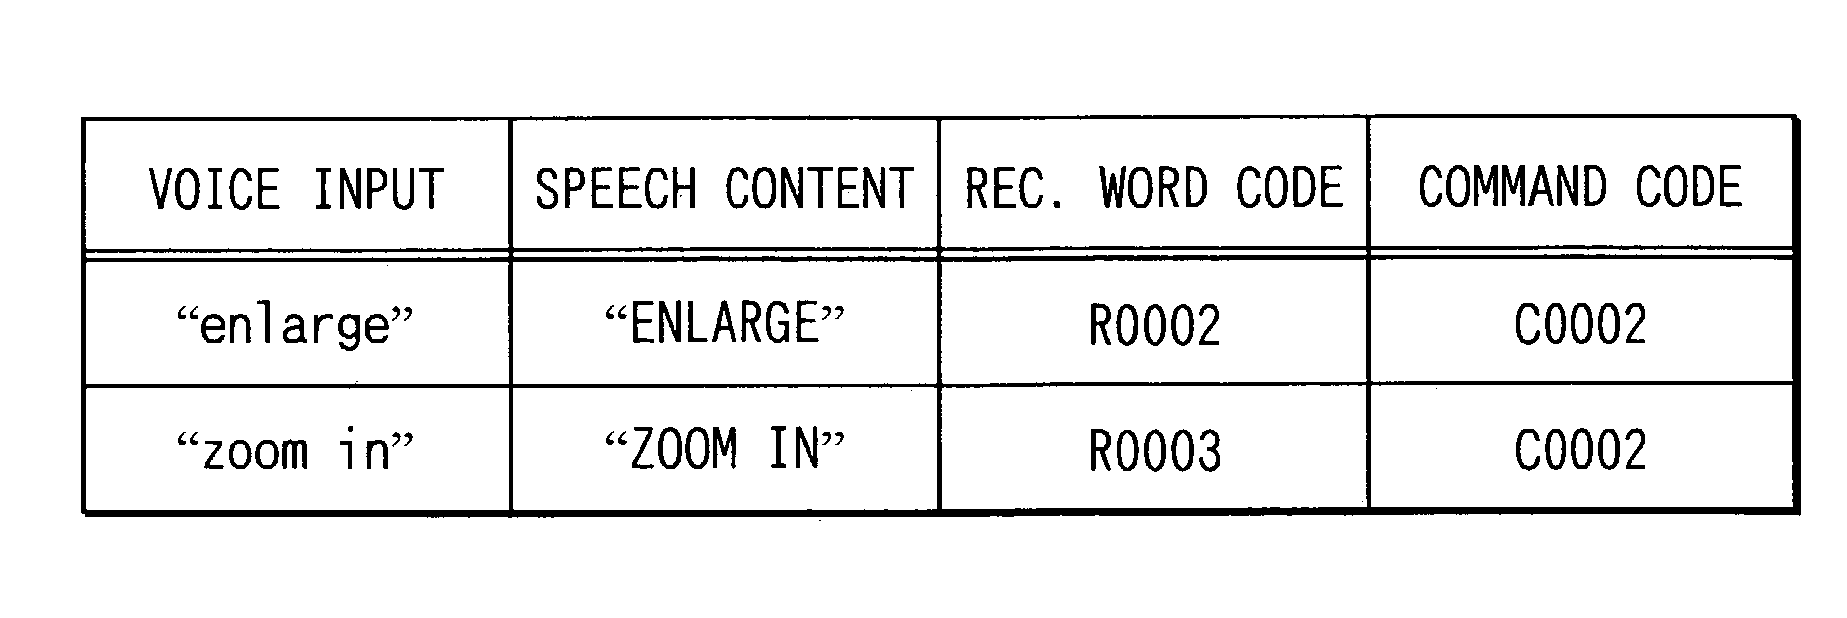 Voice control system notifying execution result including uttered speech content